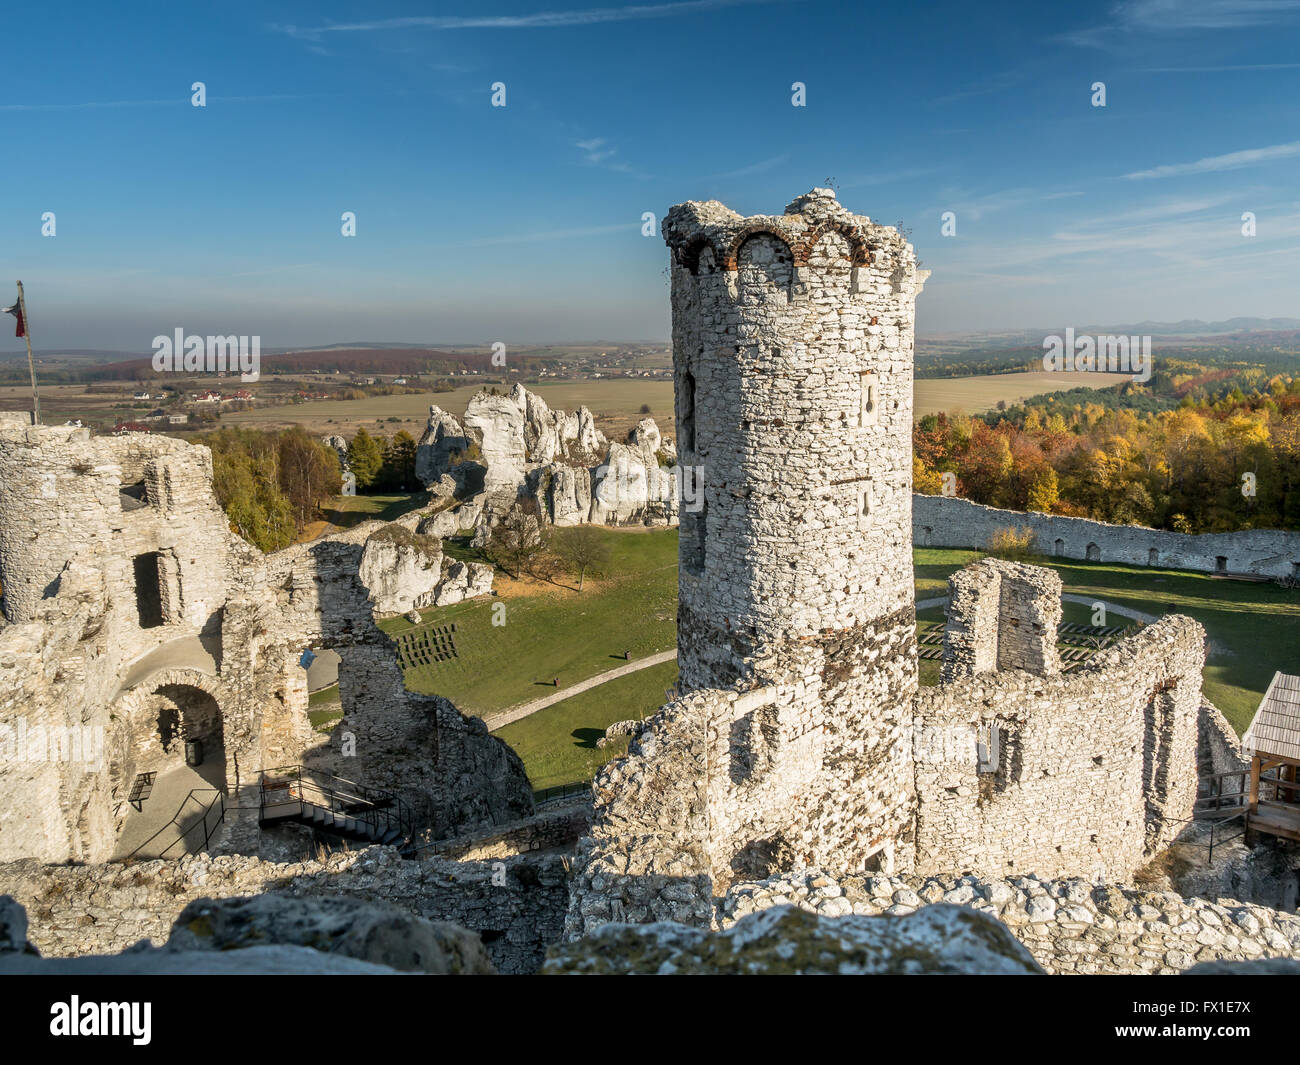 Ruins of medieval castle Ogrodzieniec, located on the Trail of the Eagles' Nest within the Krakow-Czestochowa Upland, Poland Stock Photo